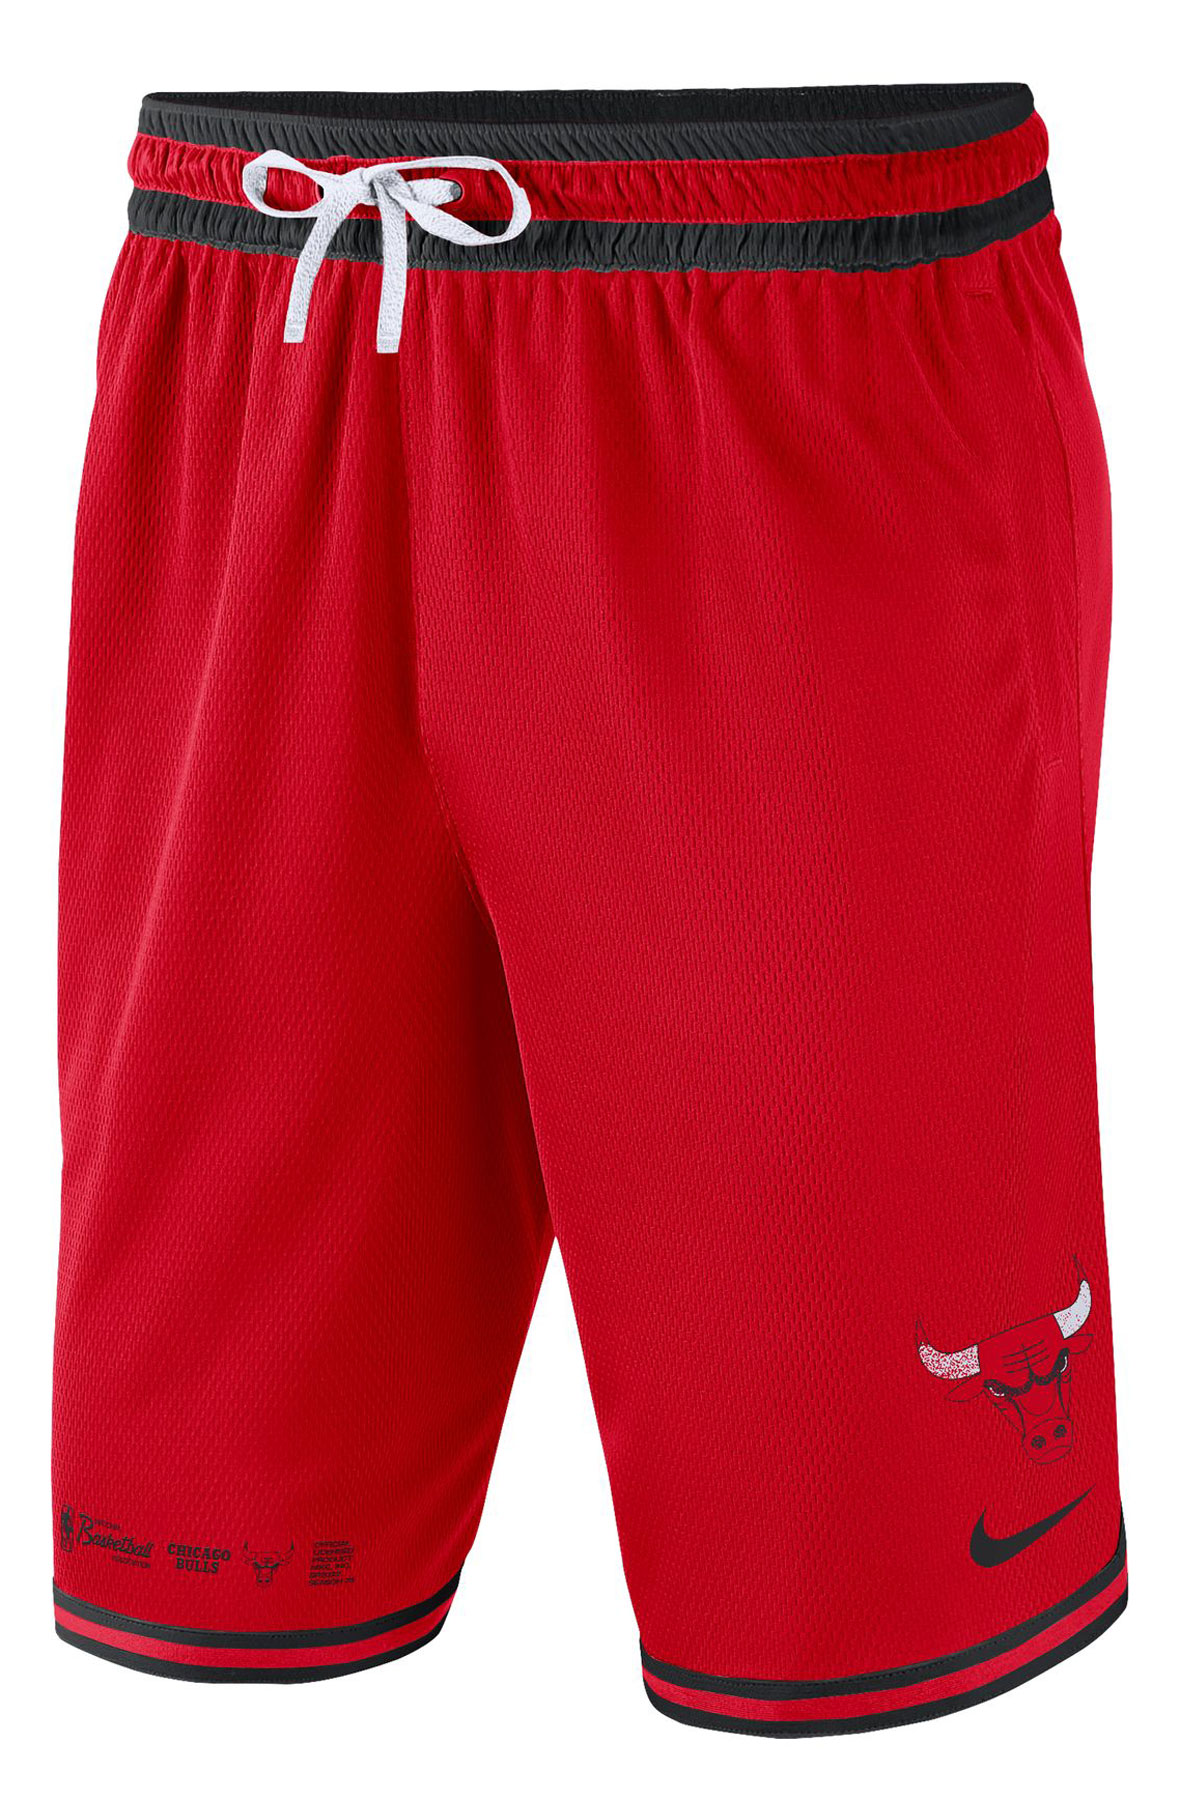 Chicago 'Bulls' Basketball Shorts (Red) – Jerseys and Sneakers